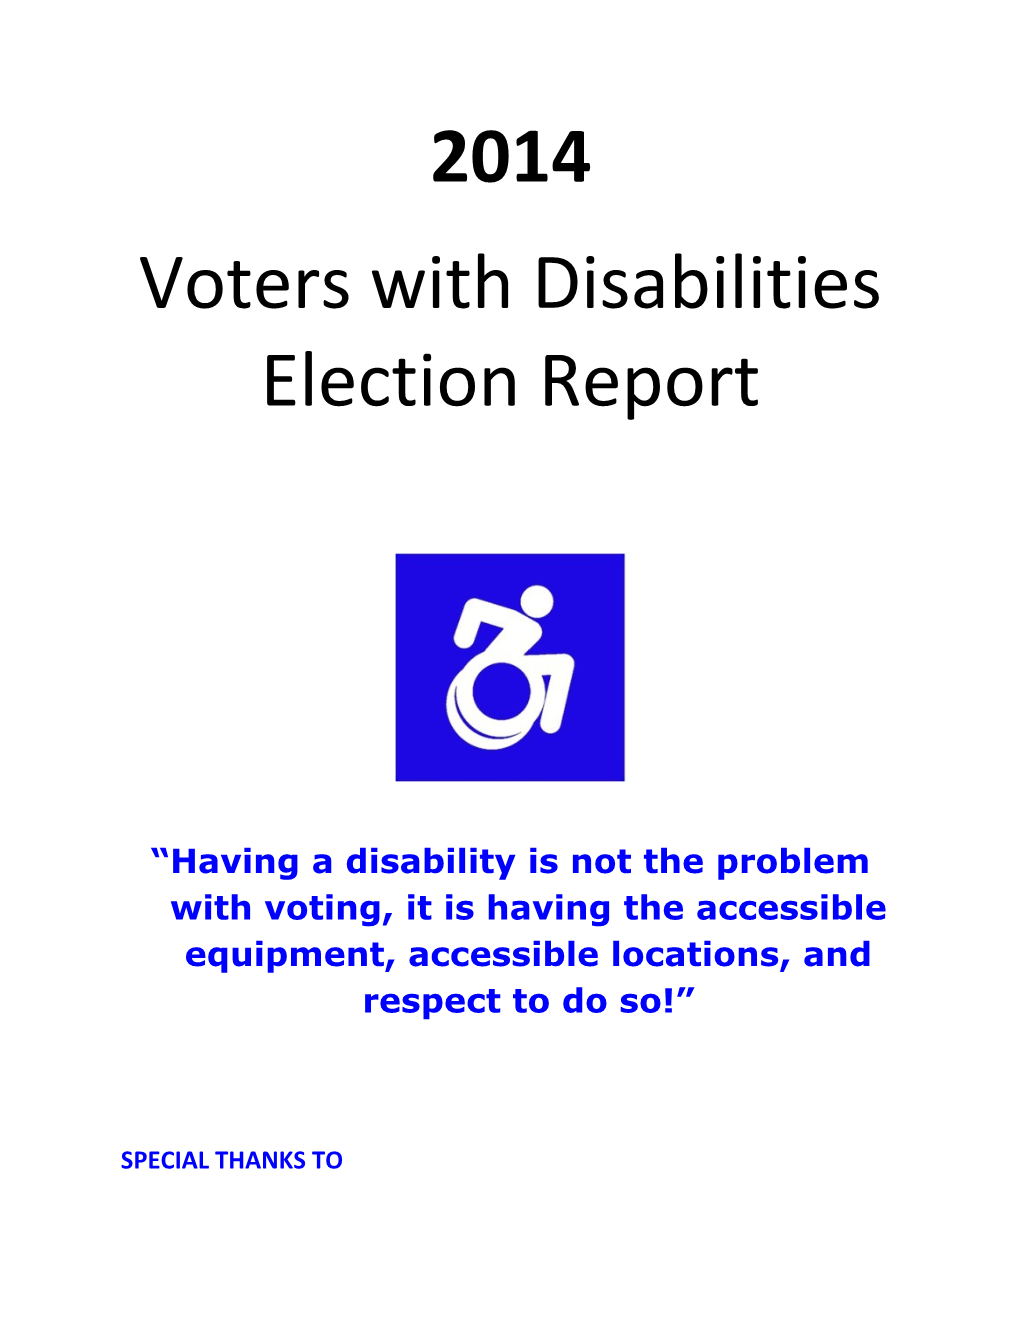 SABE 2014 Voters with Disabilities Election Report